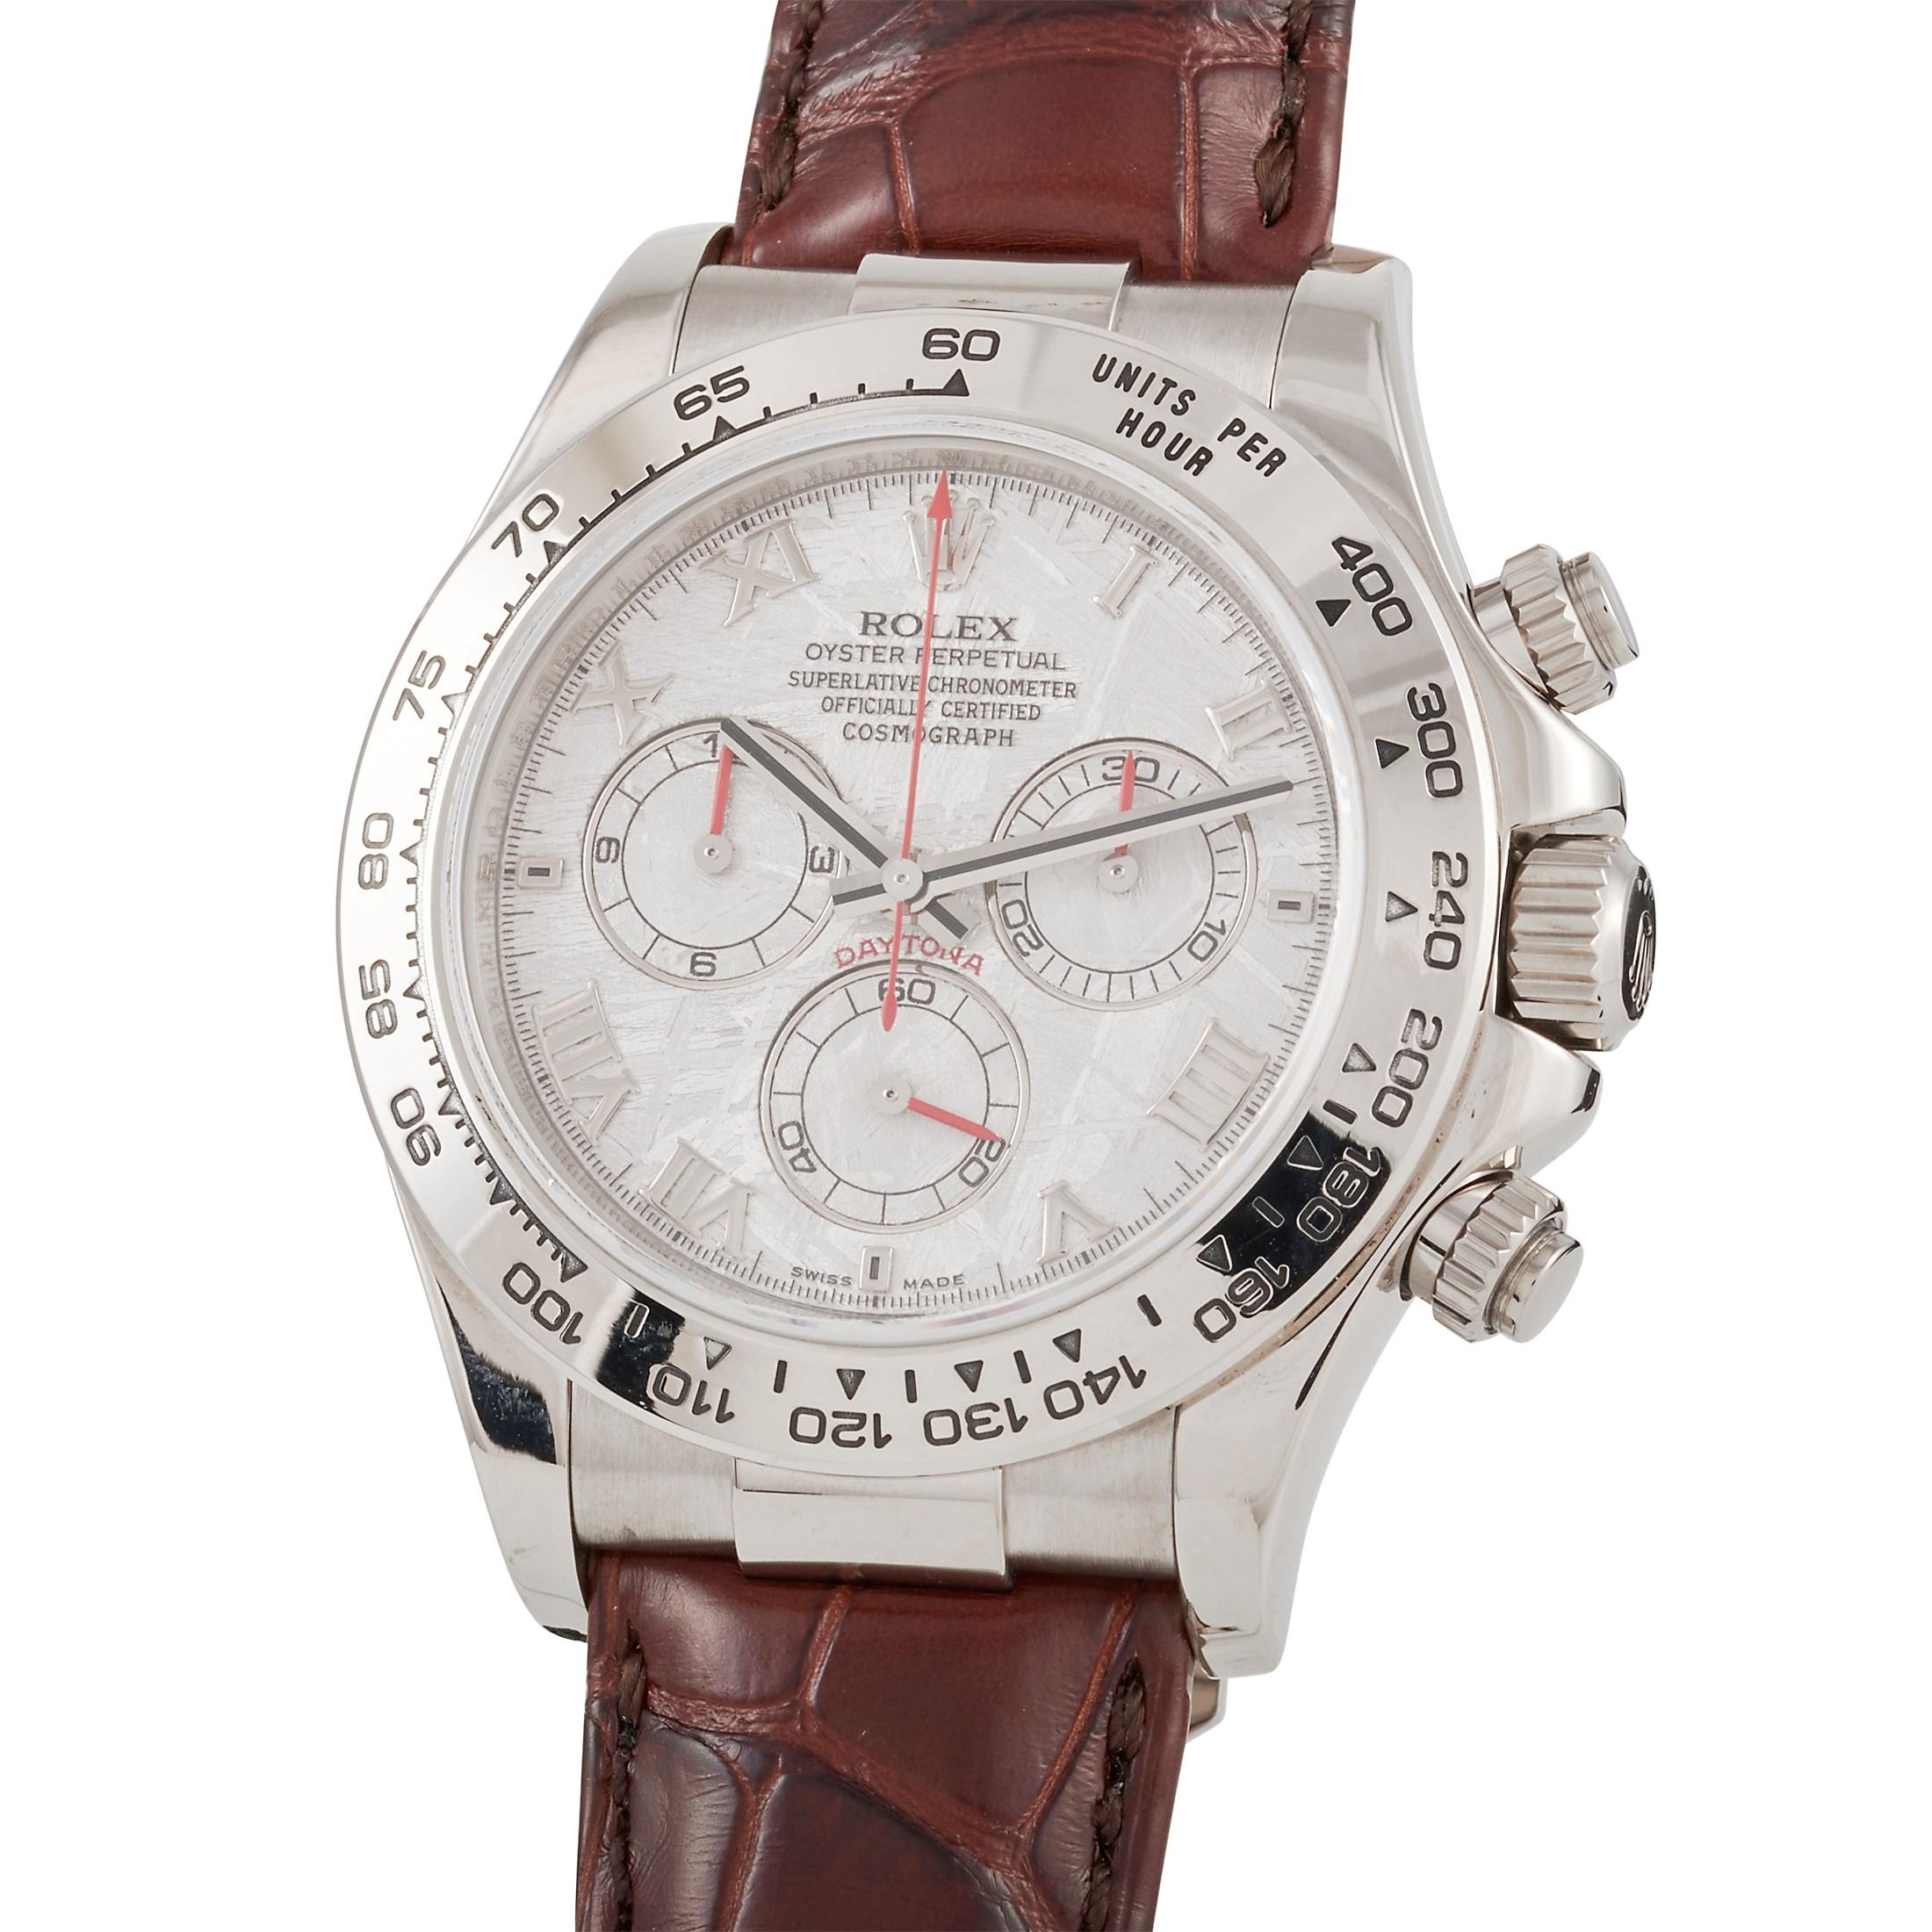 This Rolex Cosmograph Daytona Meteorite Dial Watch, reference number 116519, features a white gold case measuring 40 mm in diameter. It is presented on a brown crocodile leather strap with deployment clasp. The meteorite dial displays hours,